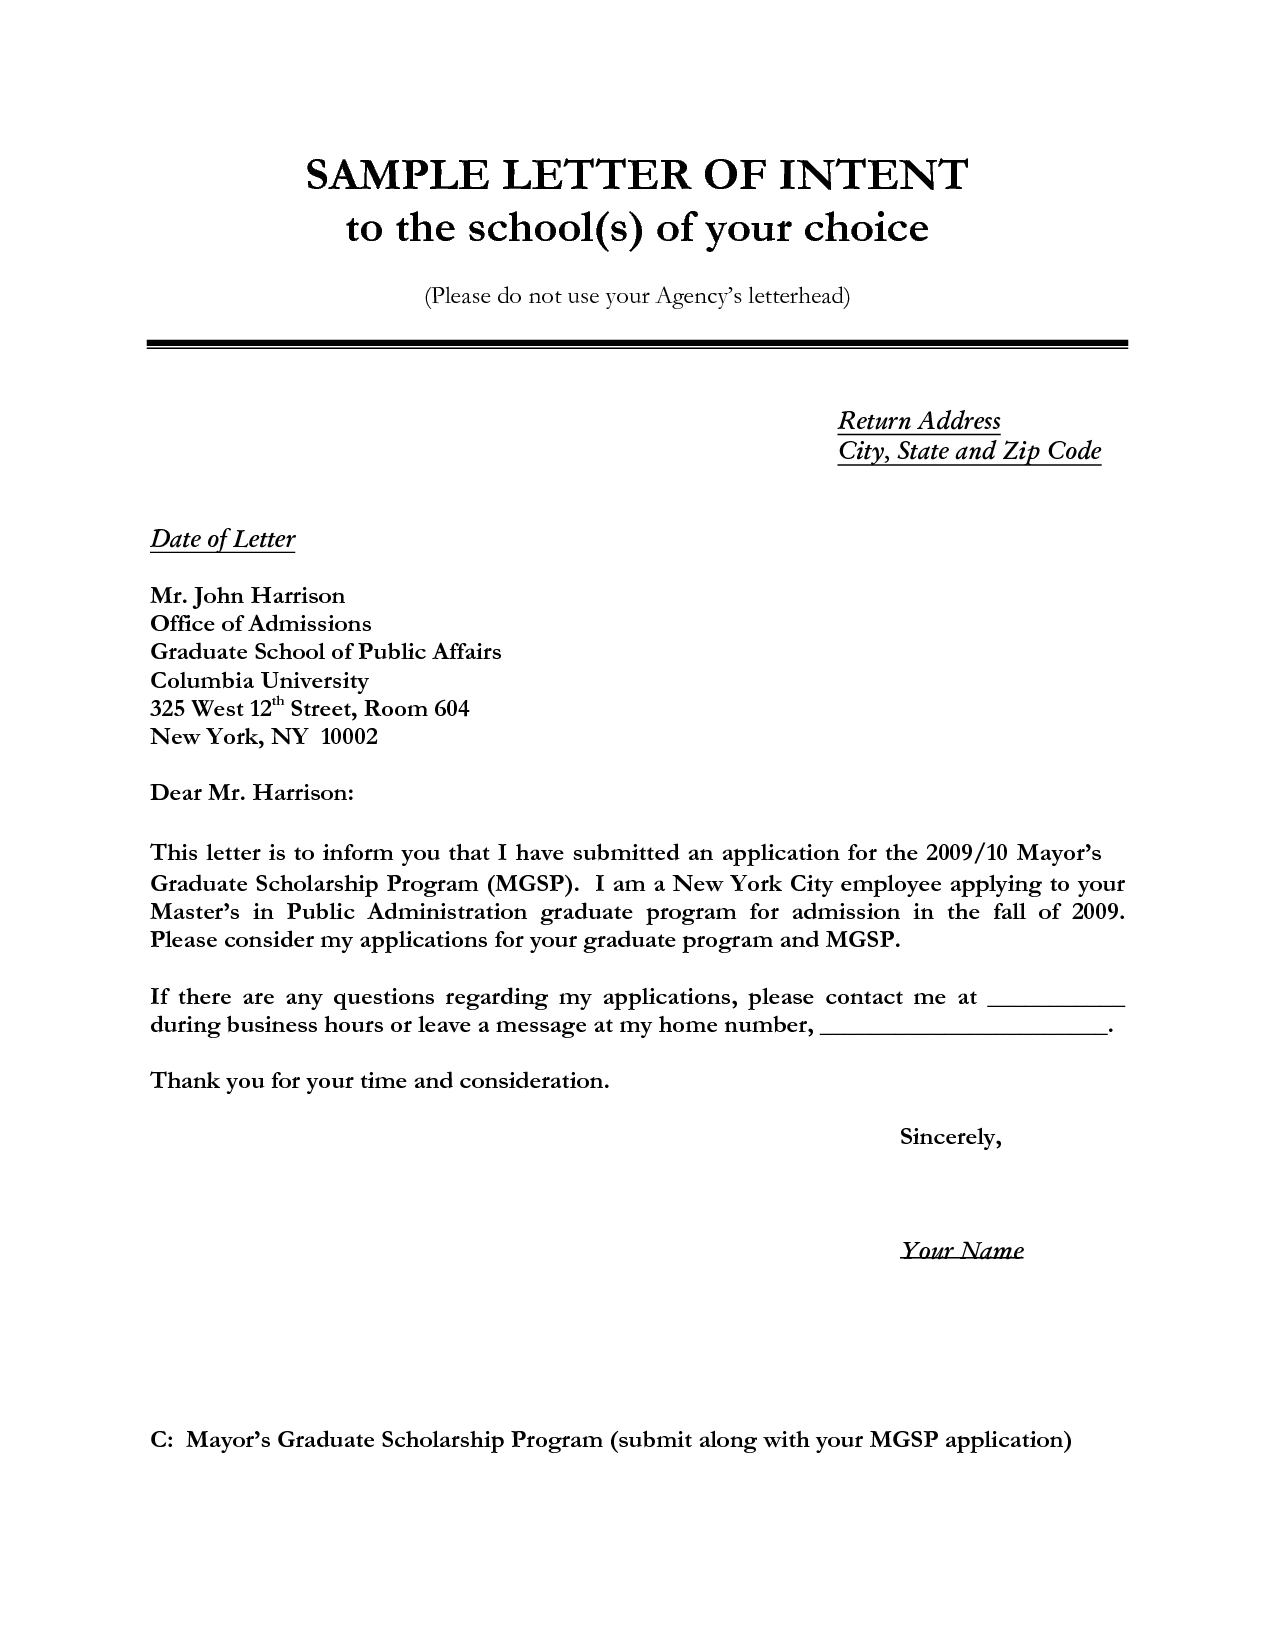 letter of interest template pdf Collection-Letter of intent sample 20-o